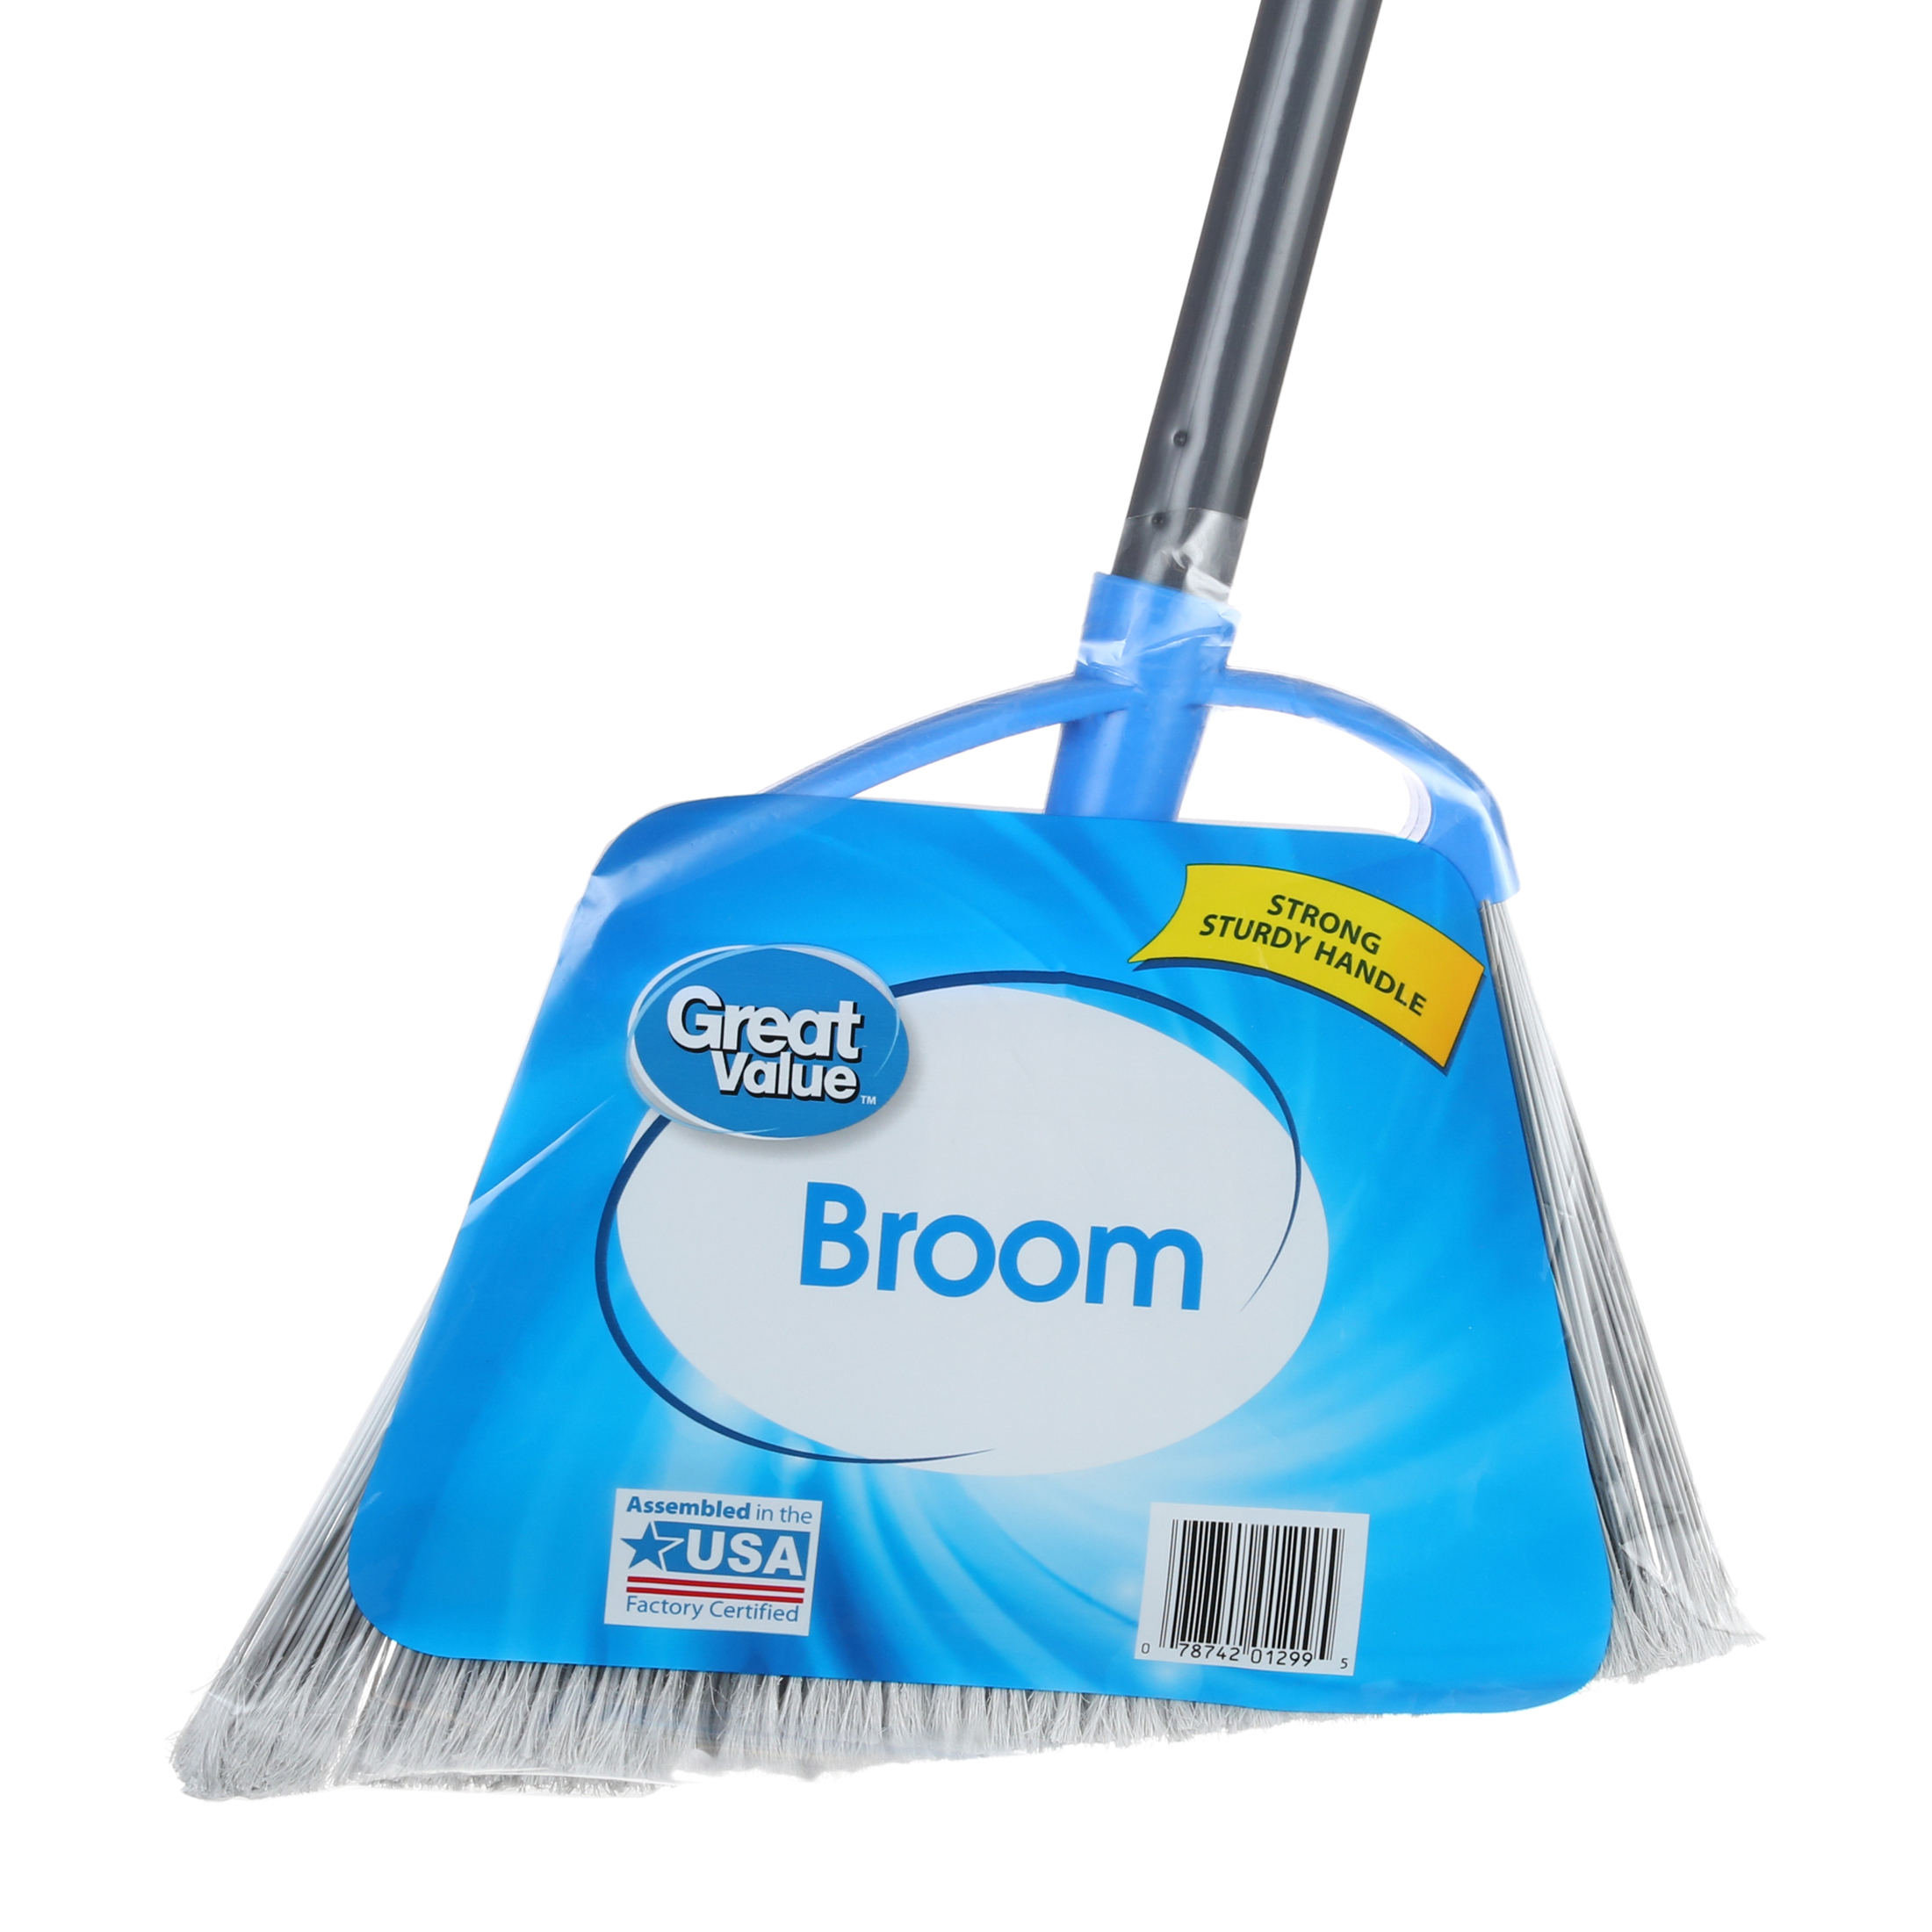 Great Value Basic Broom - image 1 of 9